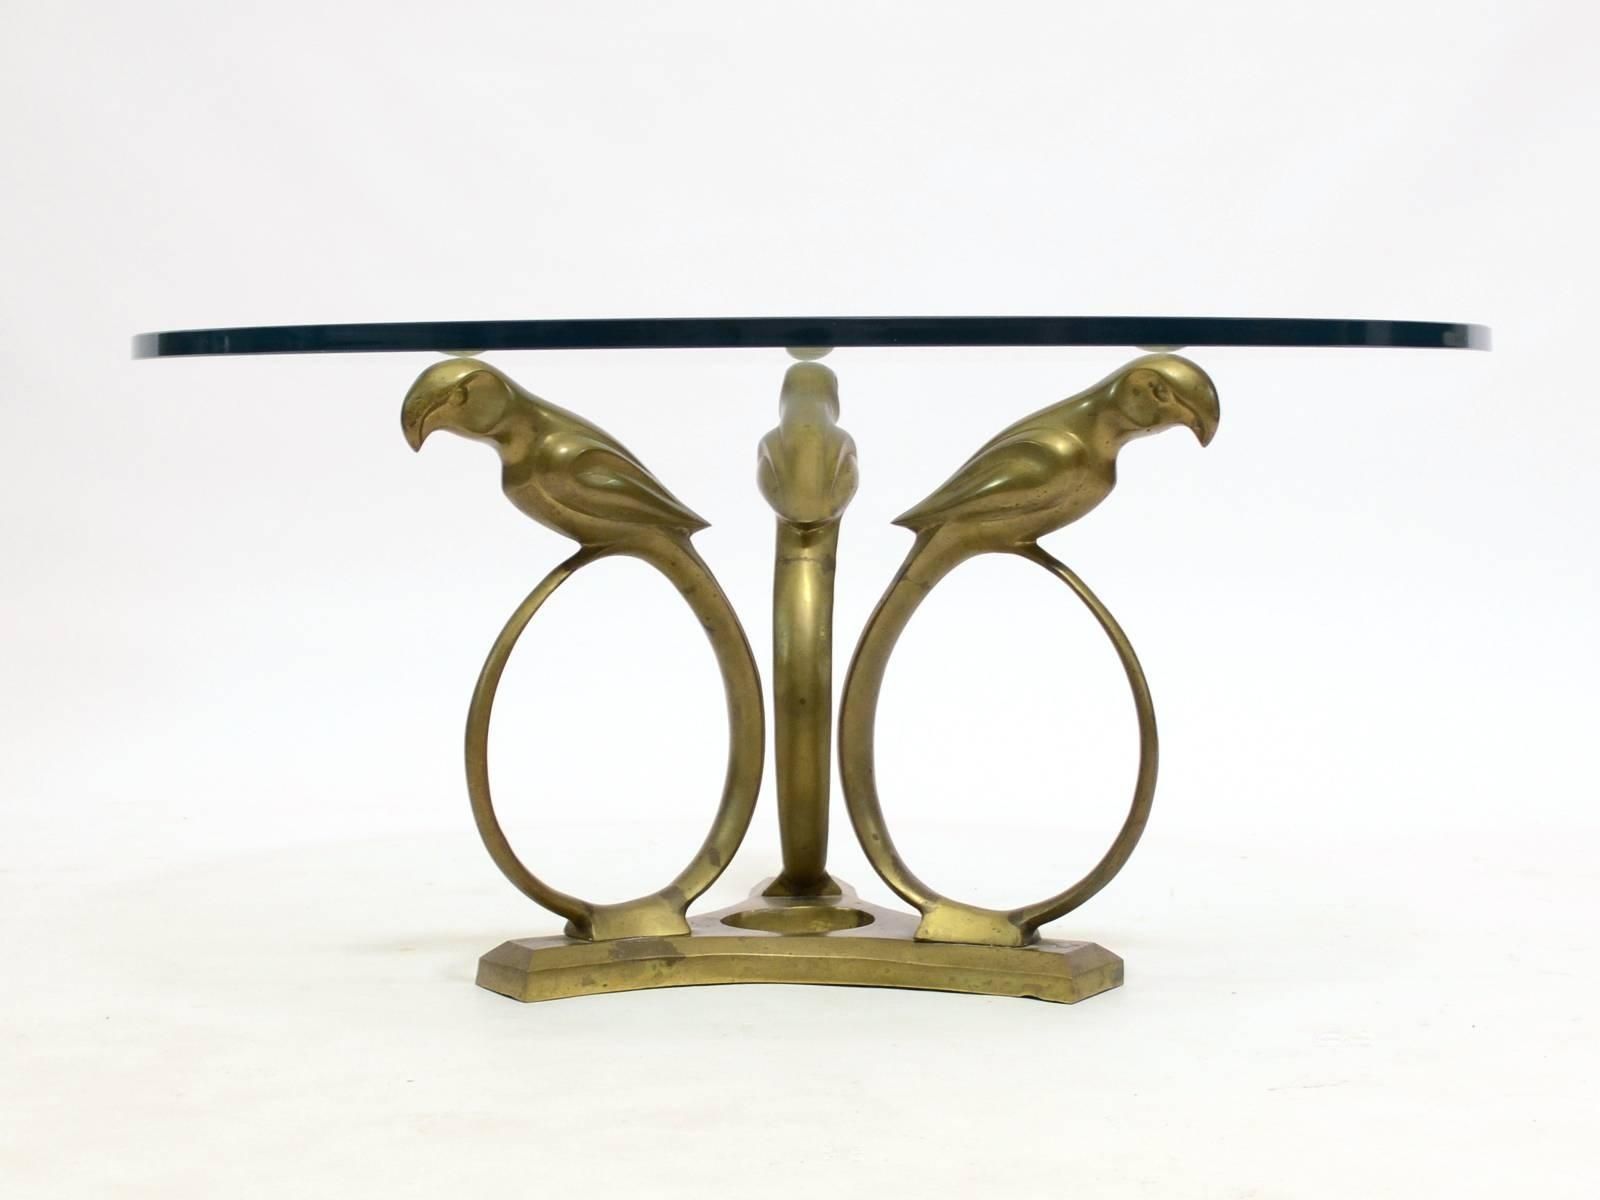 Stylized Deco Moderne Brass Parrot Coffee Table For Sale At 1stdibs In Cacti Brass Coffee Tables (View 2 of 30)